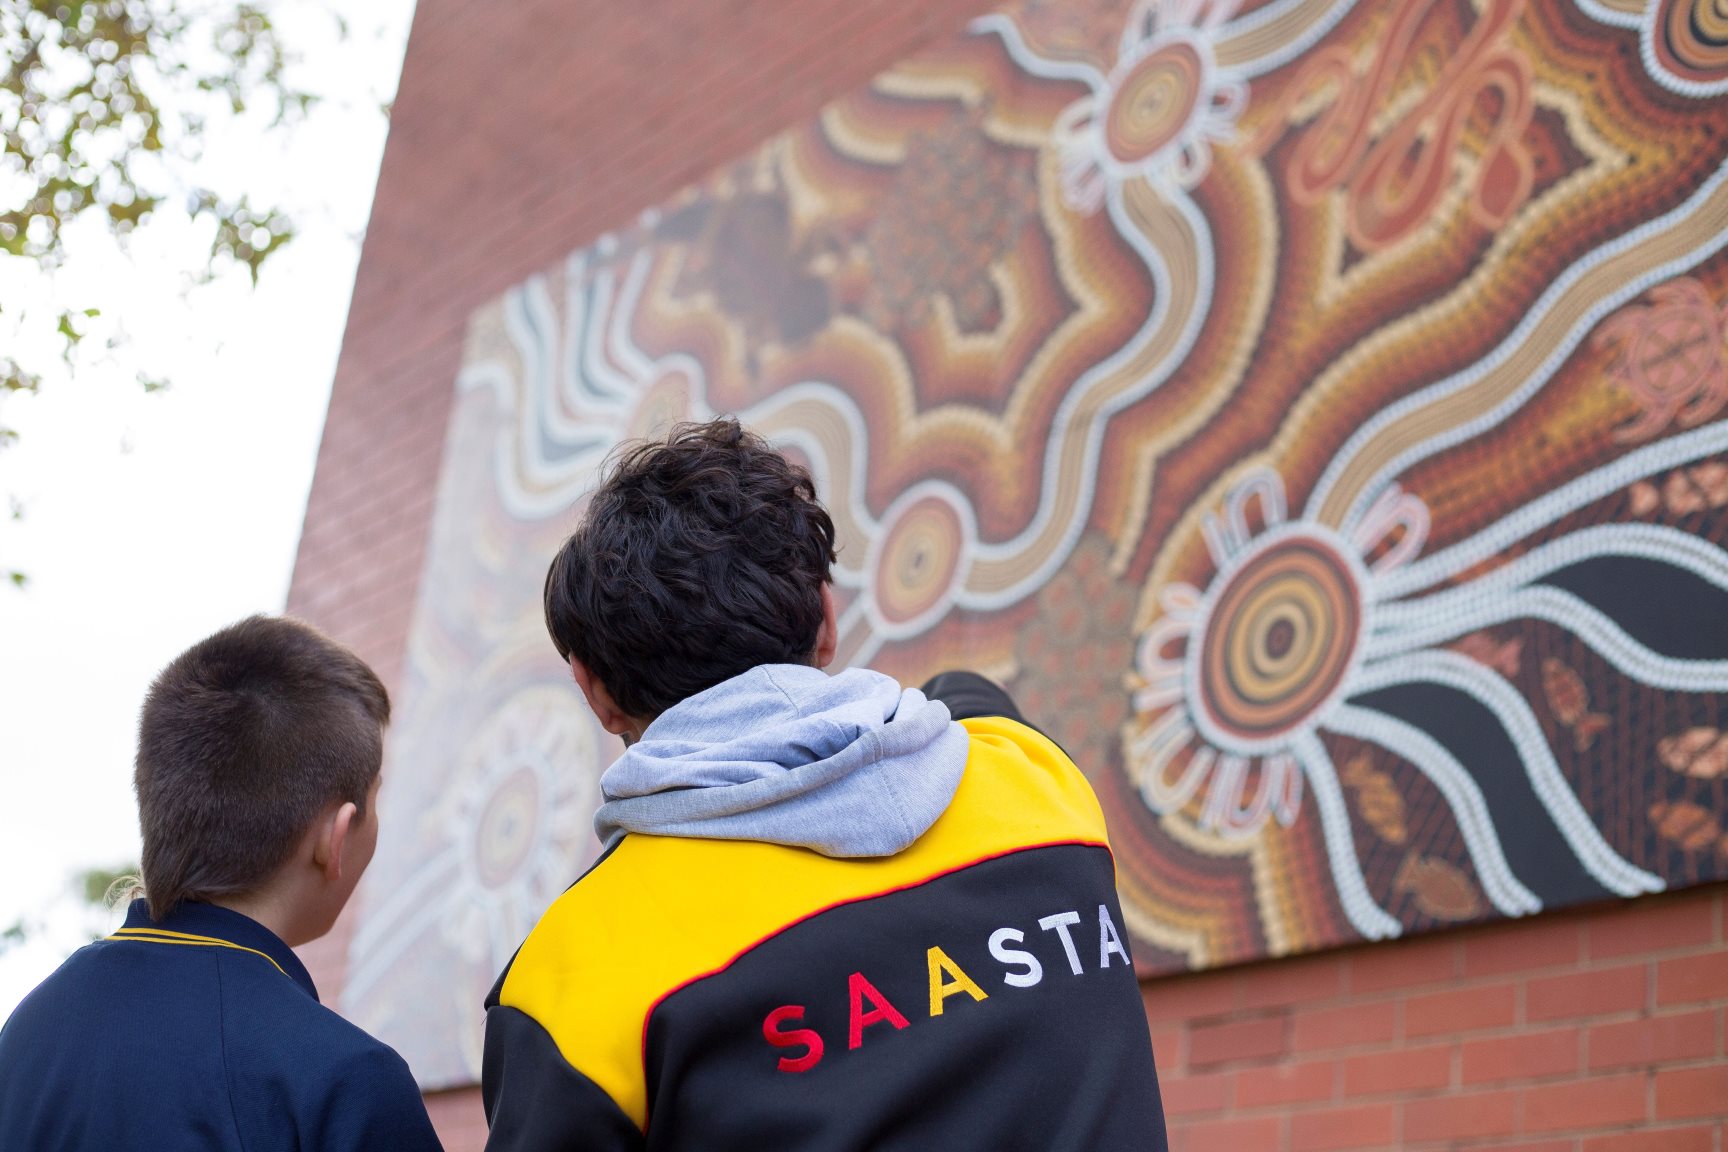 The backs of 2 people, looking and pointing at a large peice of Aboriginal art. The back of the jumper says SAASTA.